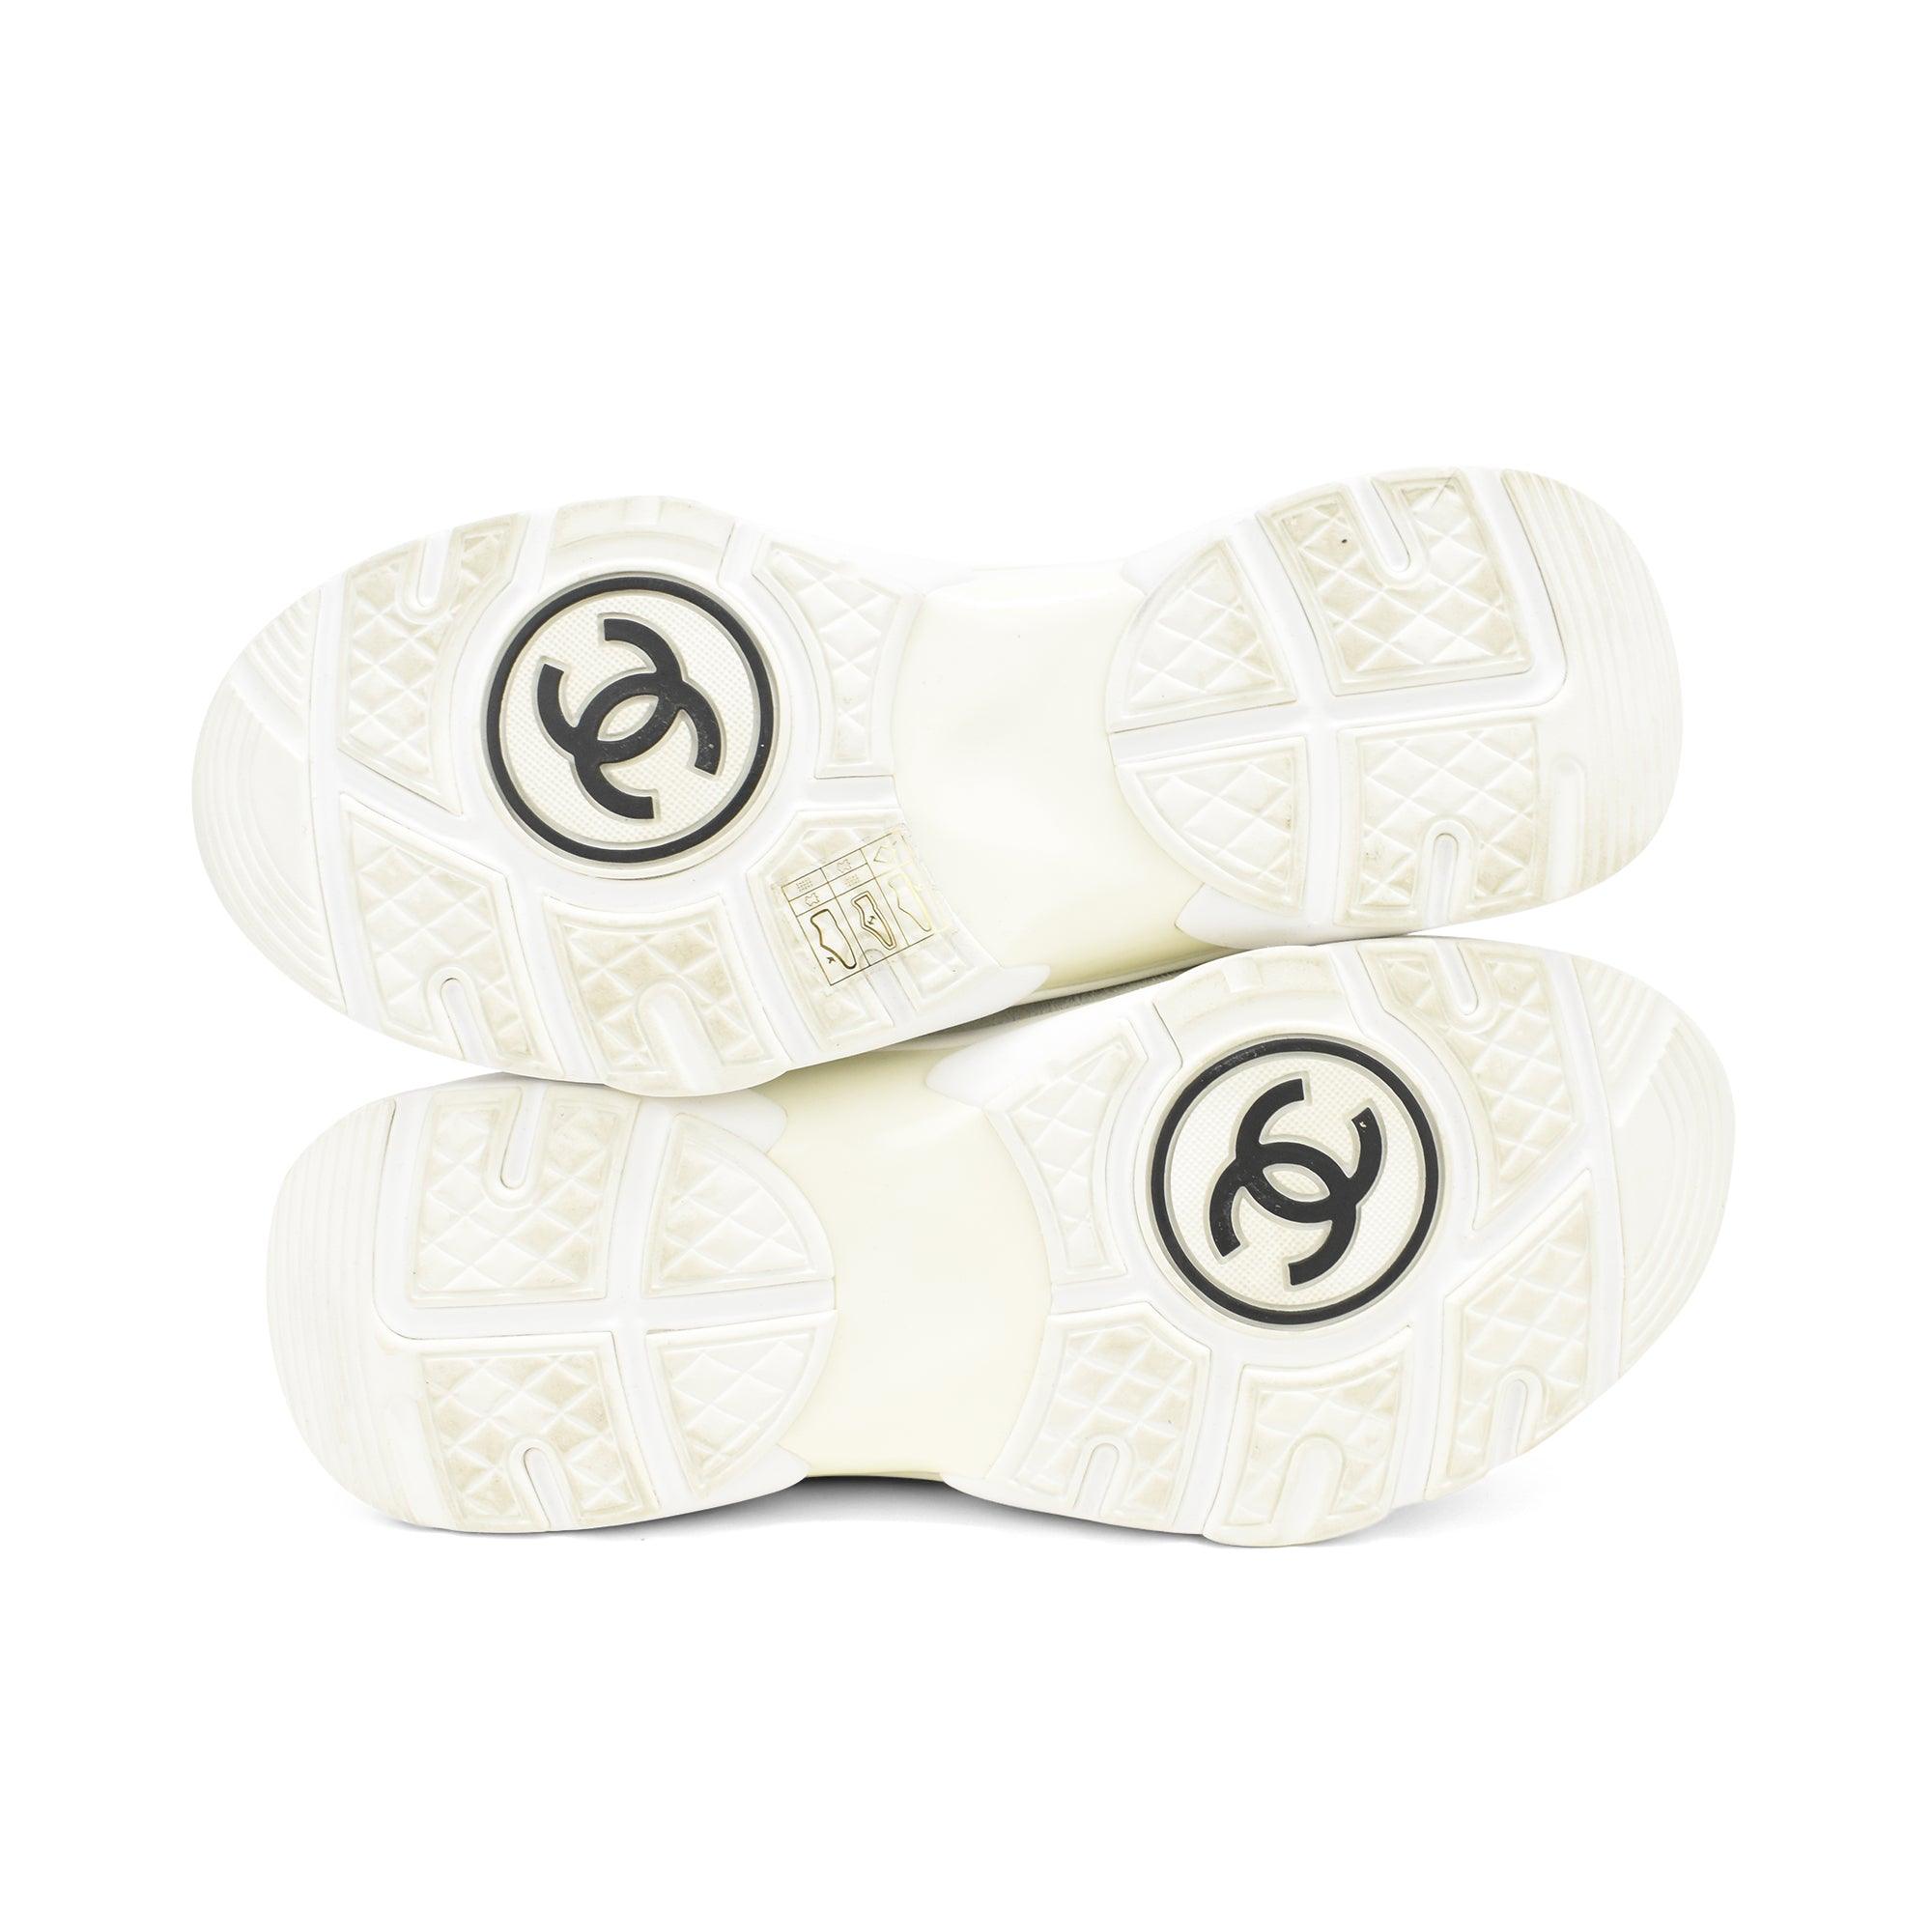 Chanel Sneakers - Women's 36 - Fashionably Yours